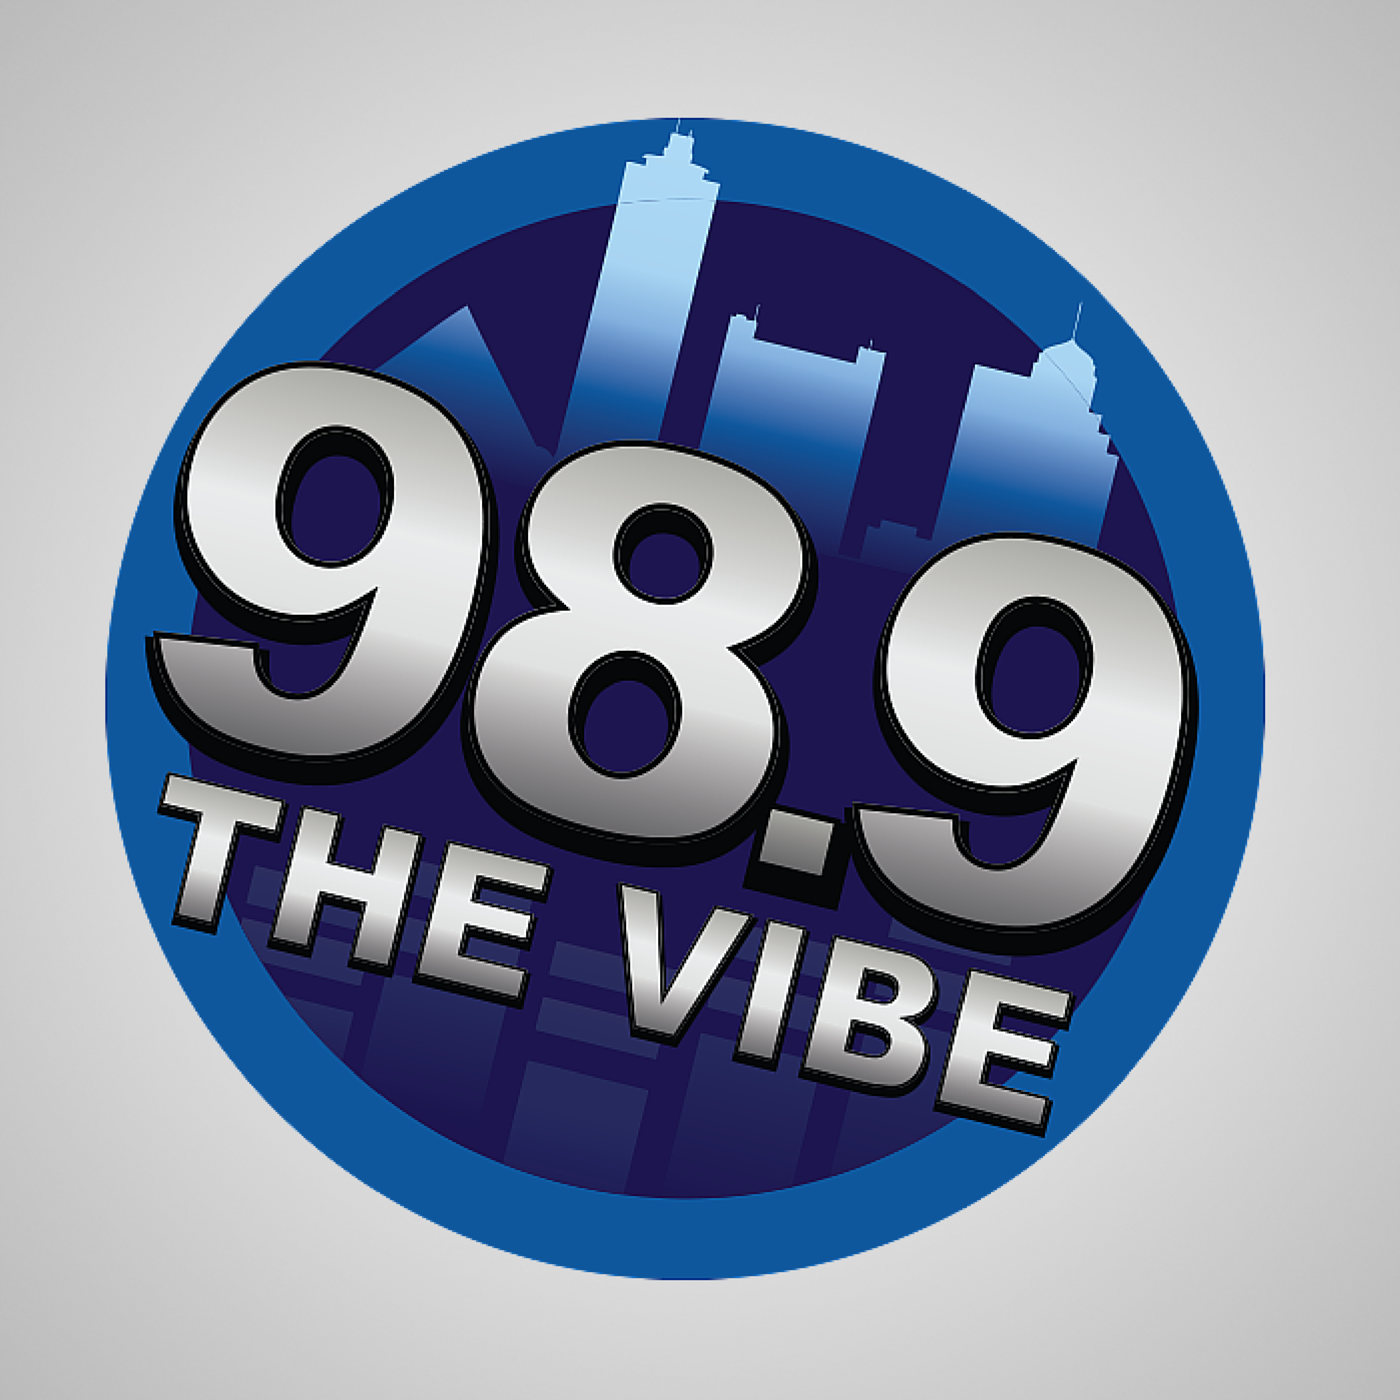 98.3 The Vibe  Your Music. Your Vibe.